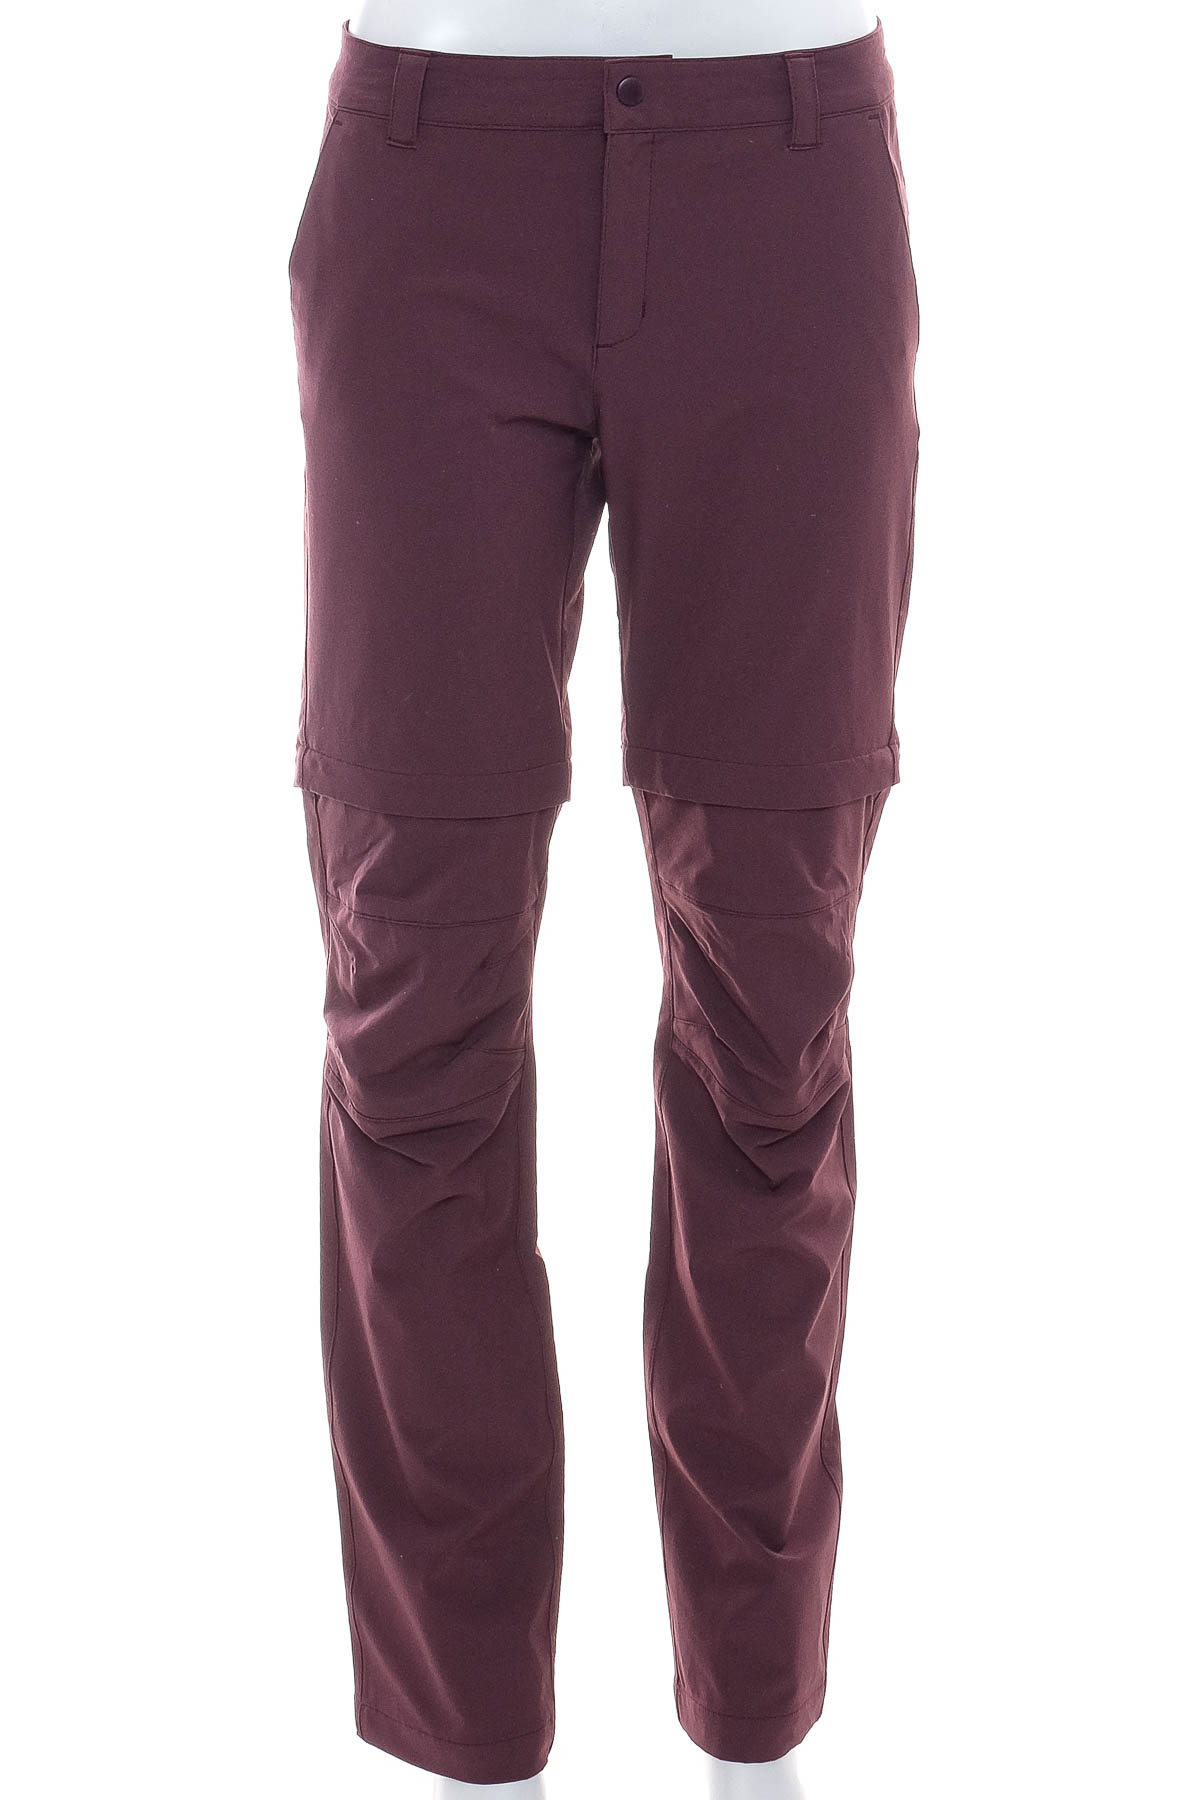 Trousers for girl - FRILUFTS - 0